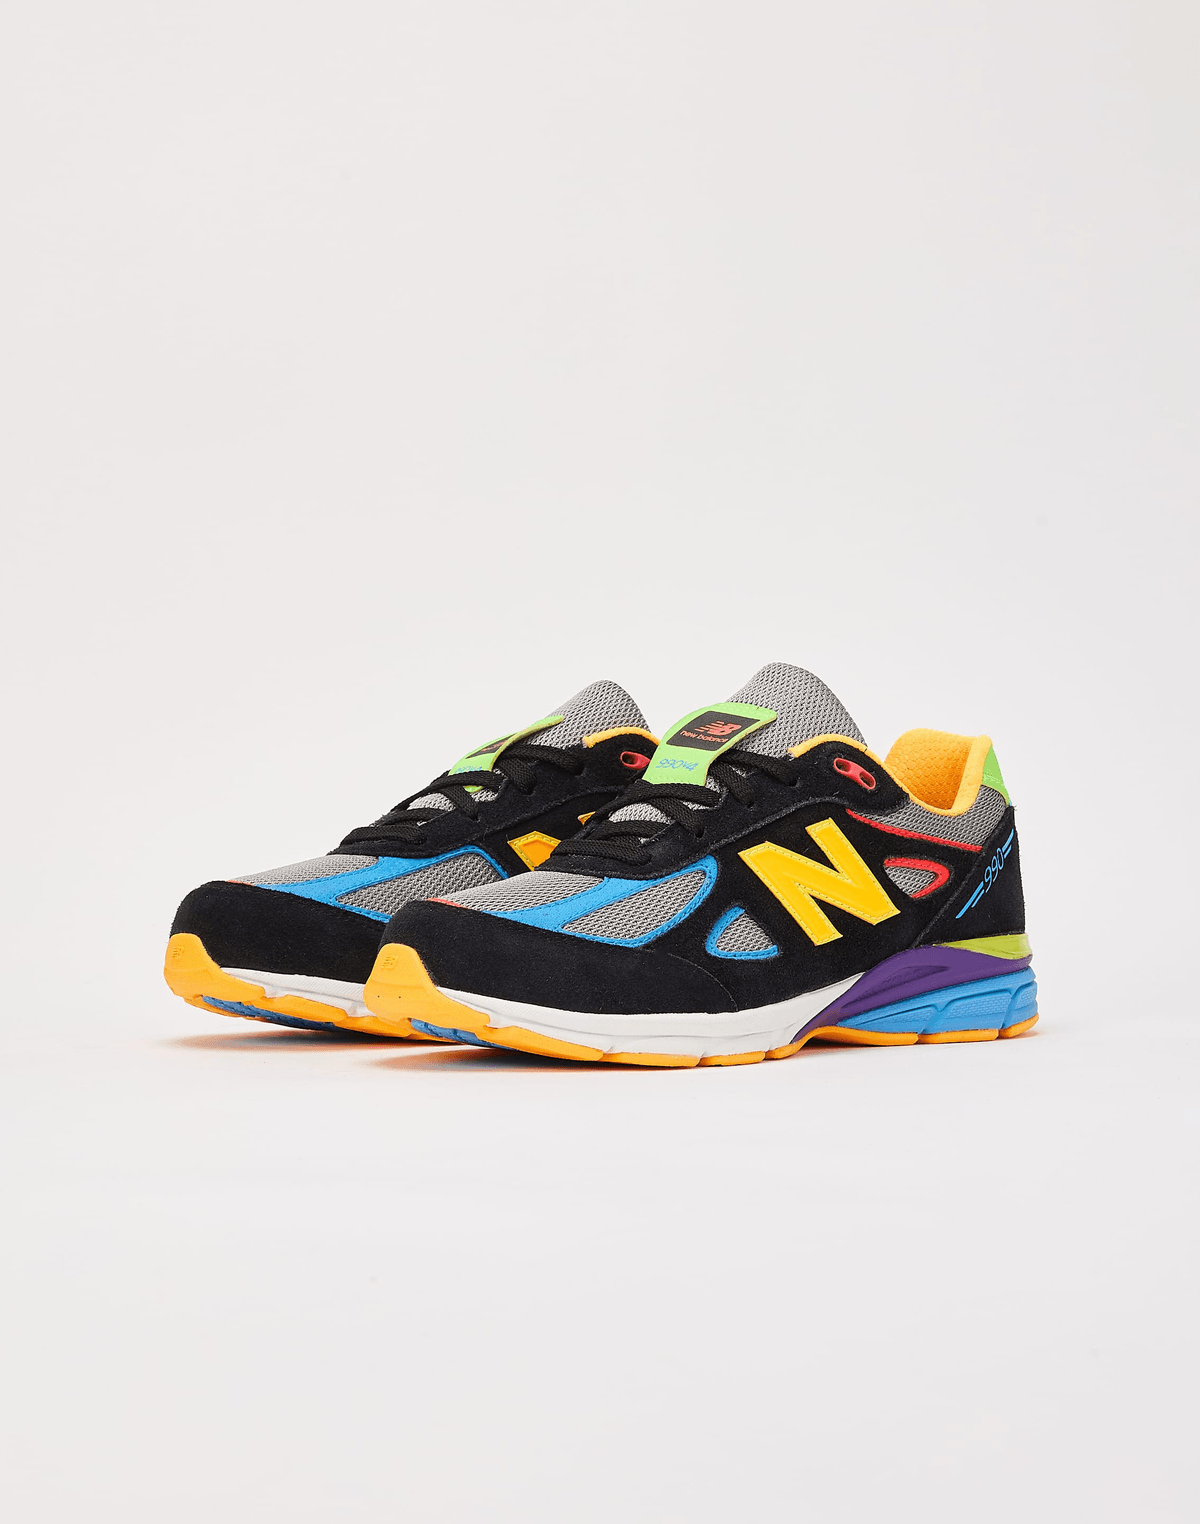 DTLR x New Balance 990v4 "Wild Style 2.0" Releases July 14th